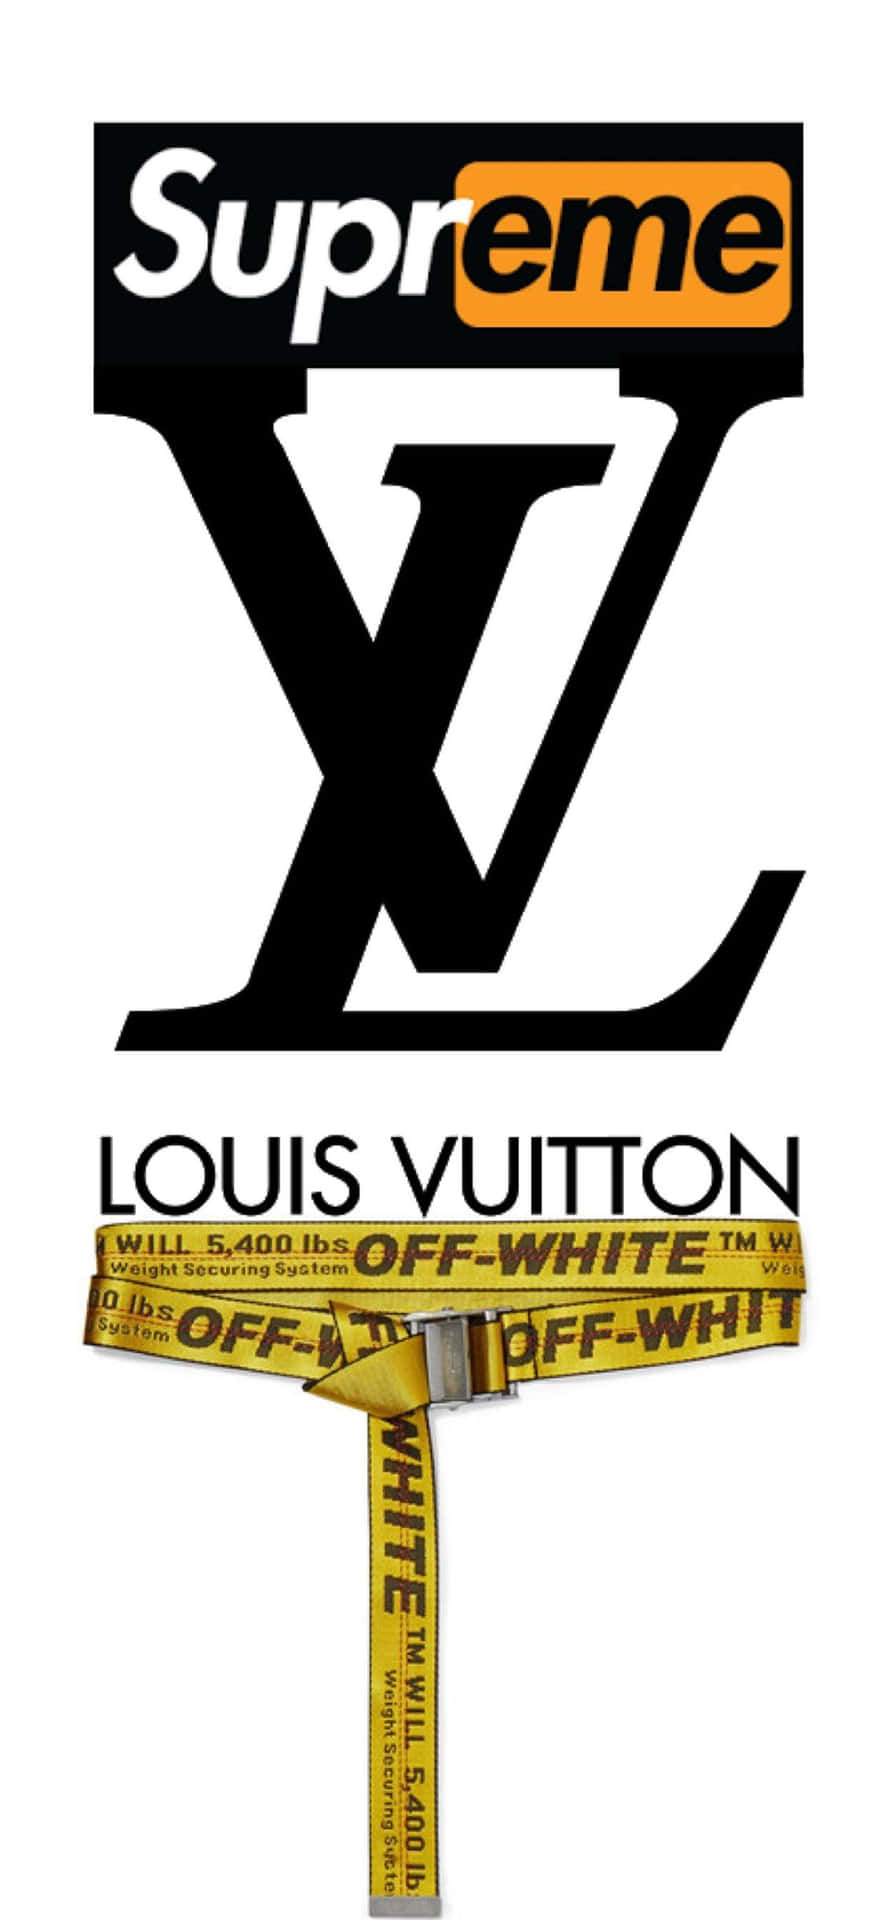 Supreme Louis Vuitton And Off White iPhone Wallpaper